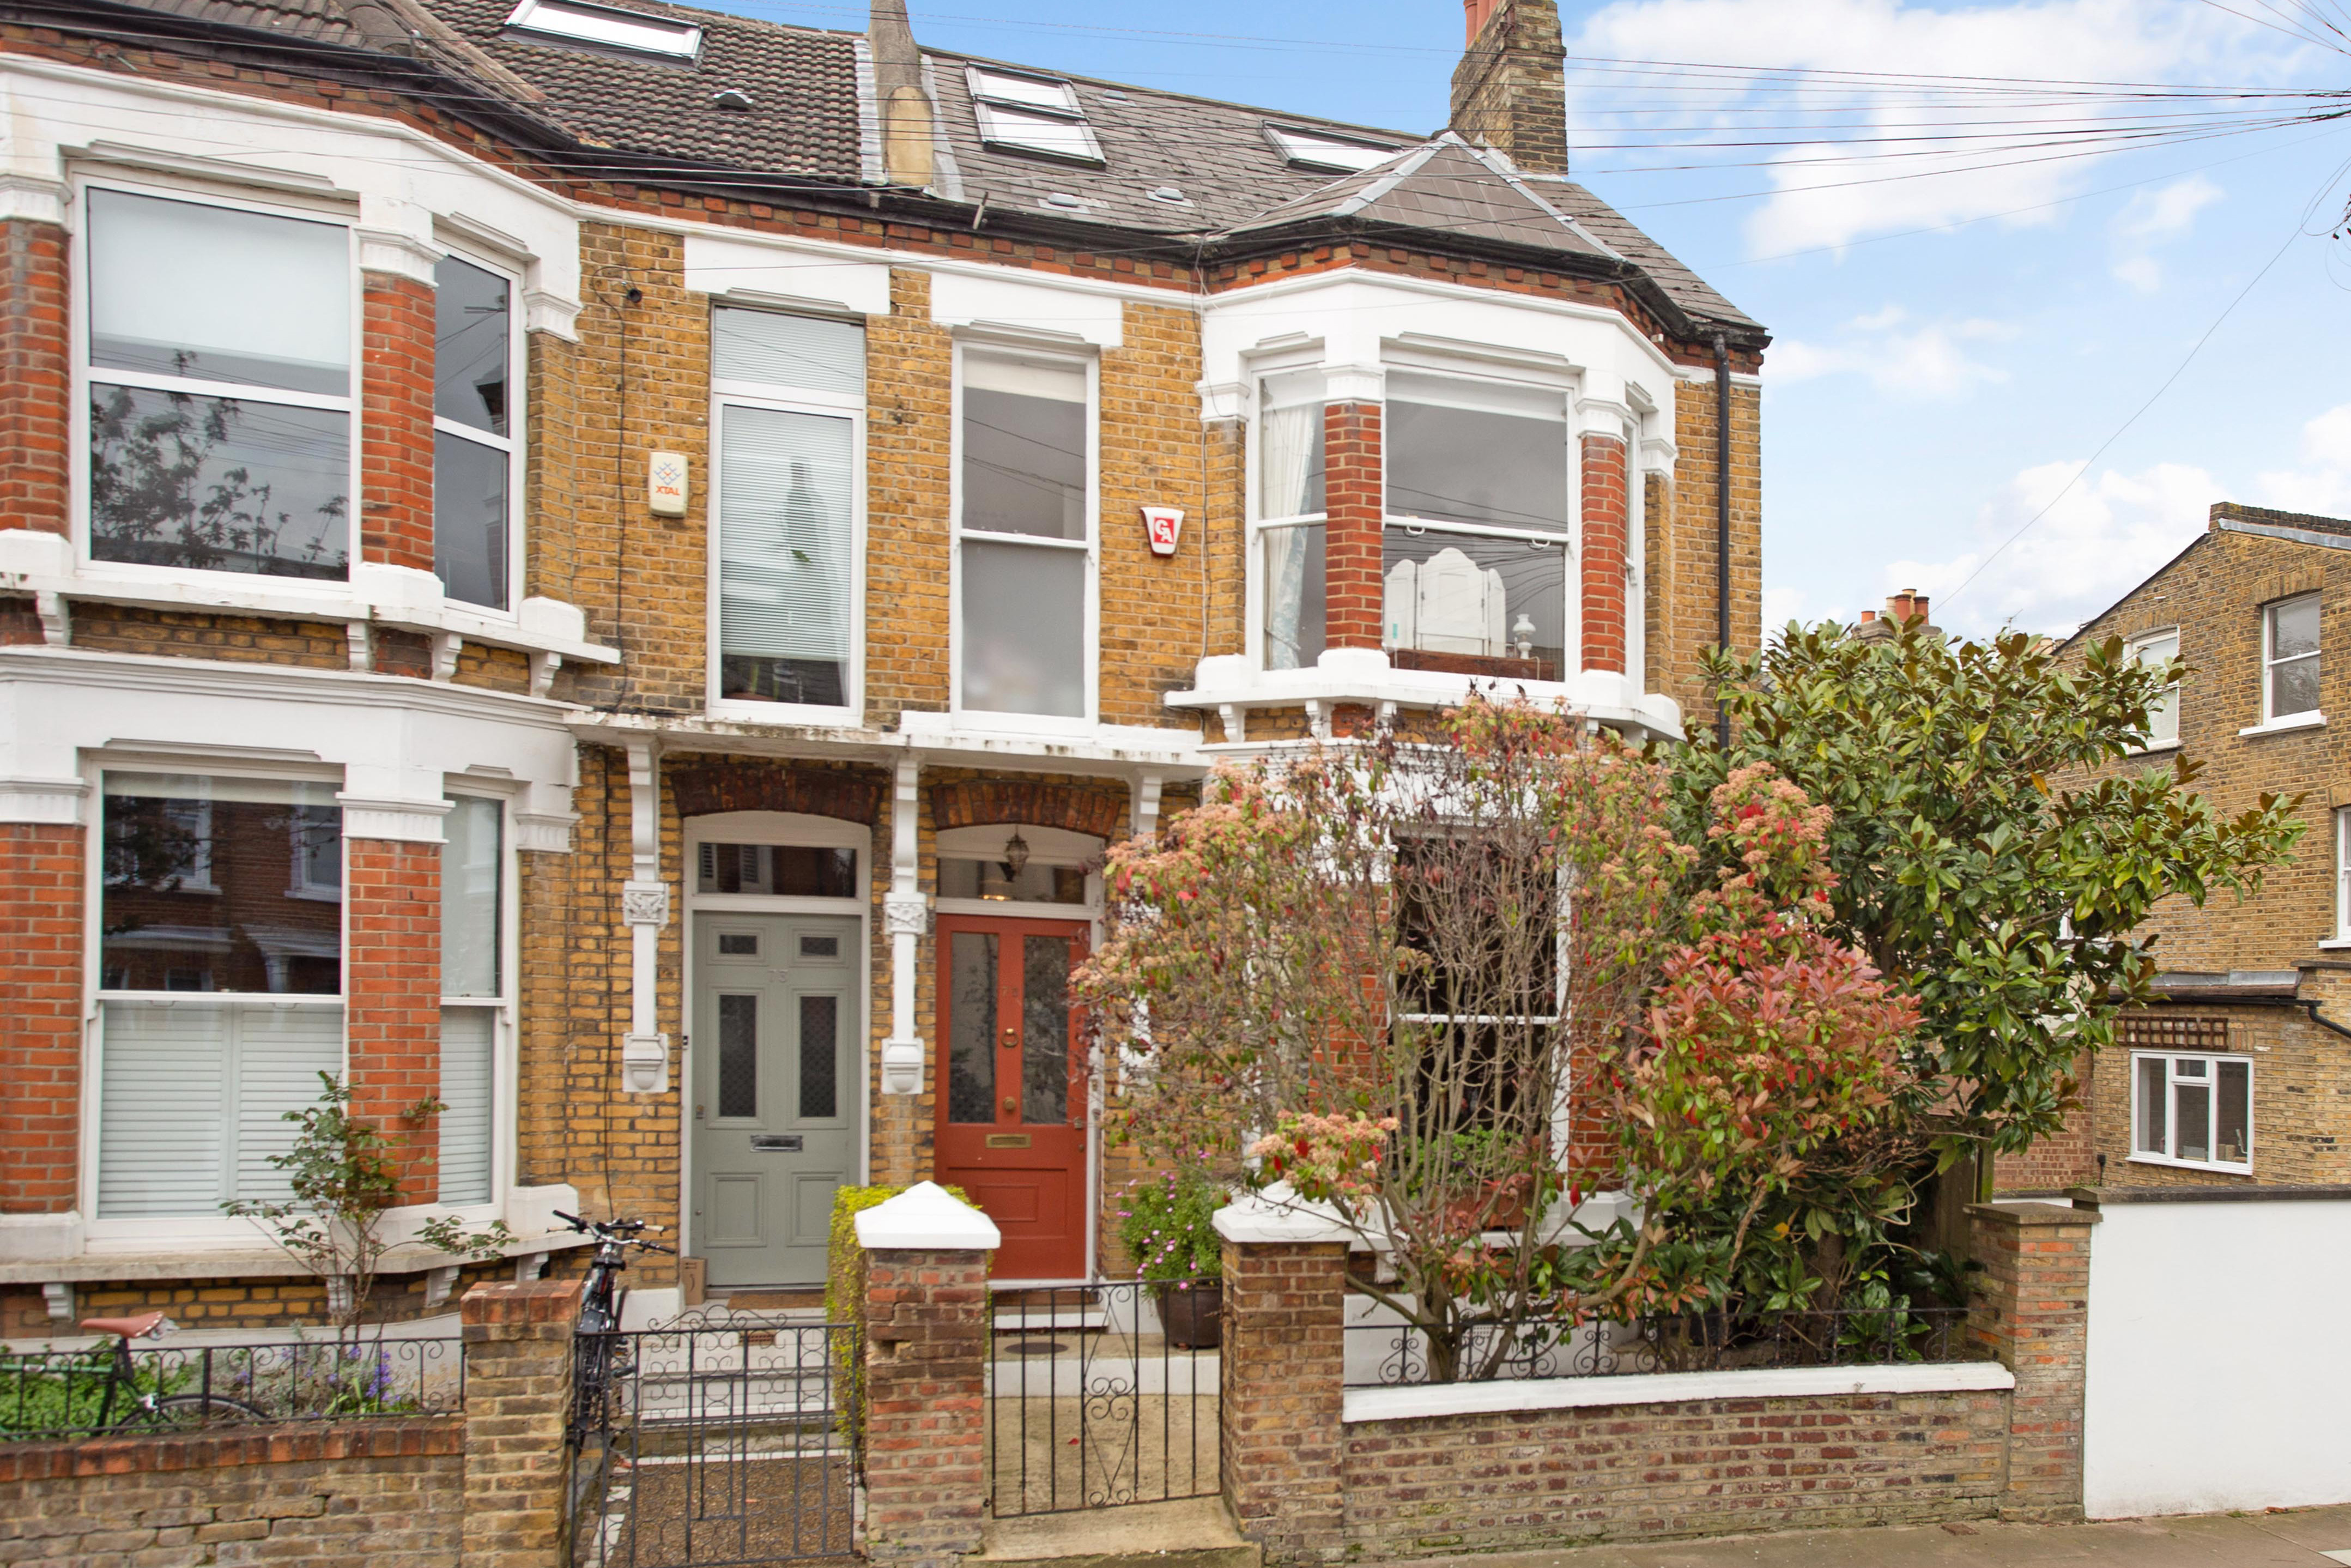 4 bedroom end terrace house for sale